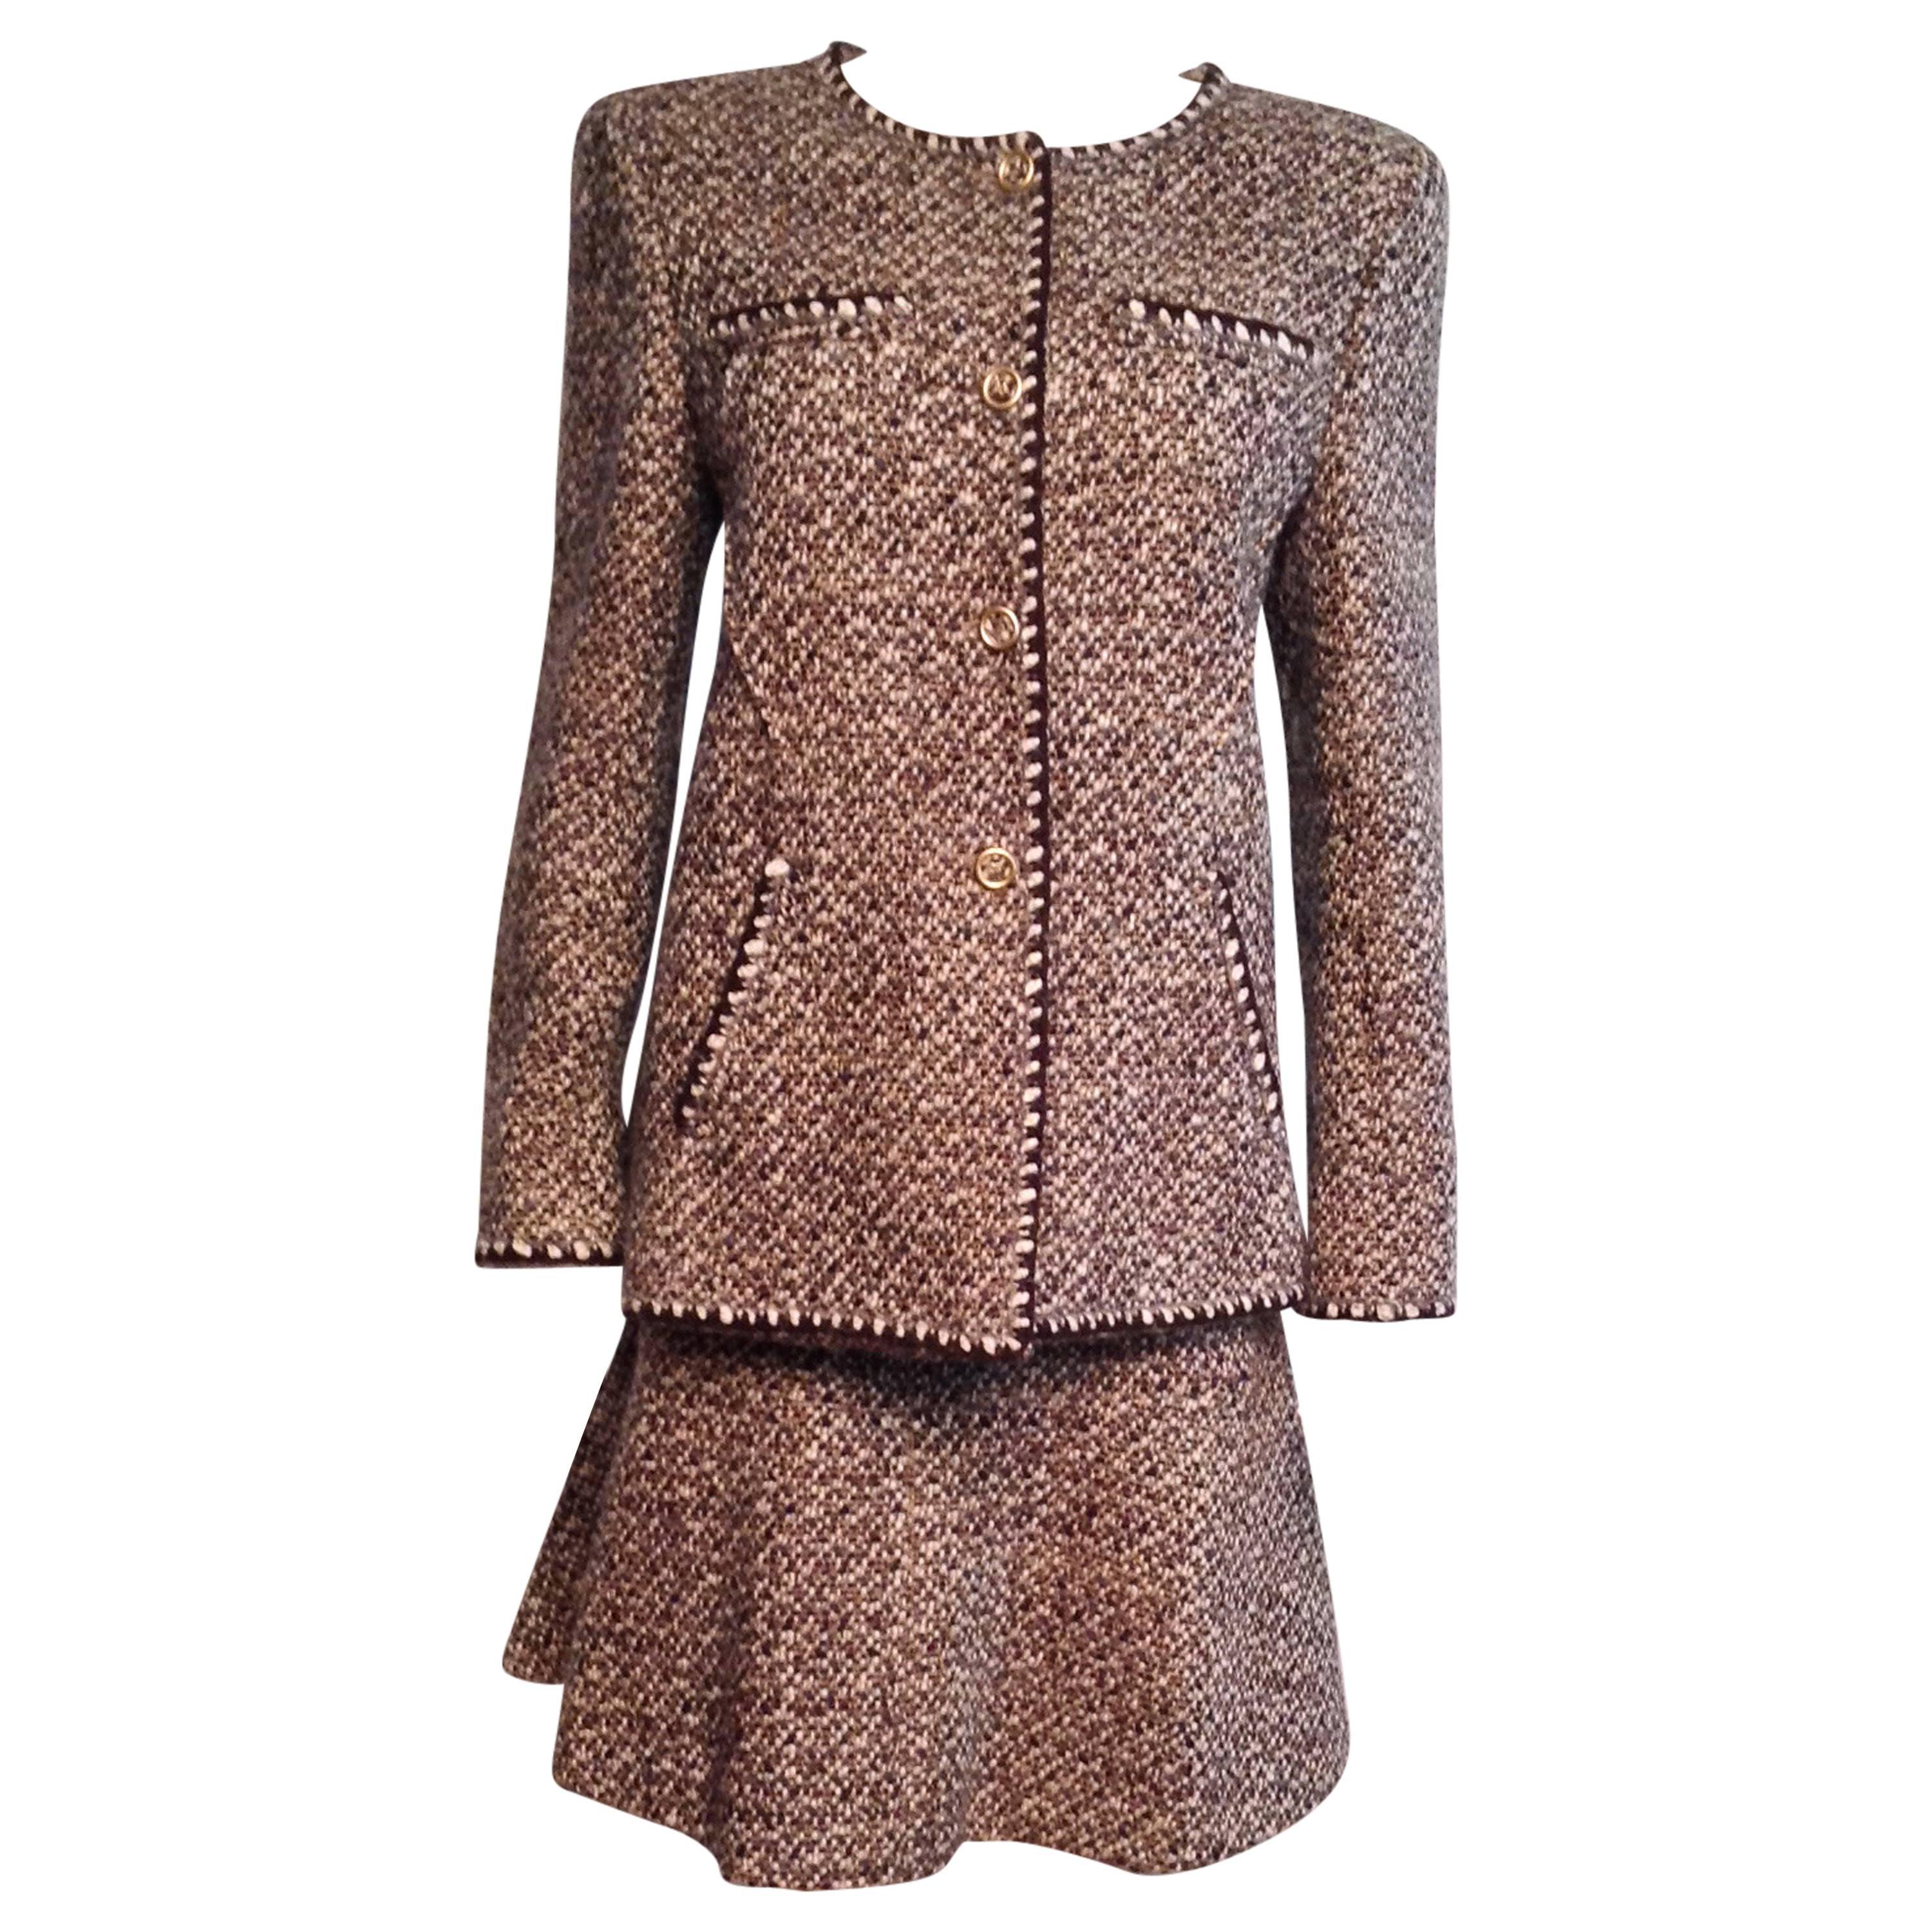 Chanel Vintage Brown Tweed Skirt Suit Size 42 For Sale